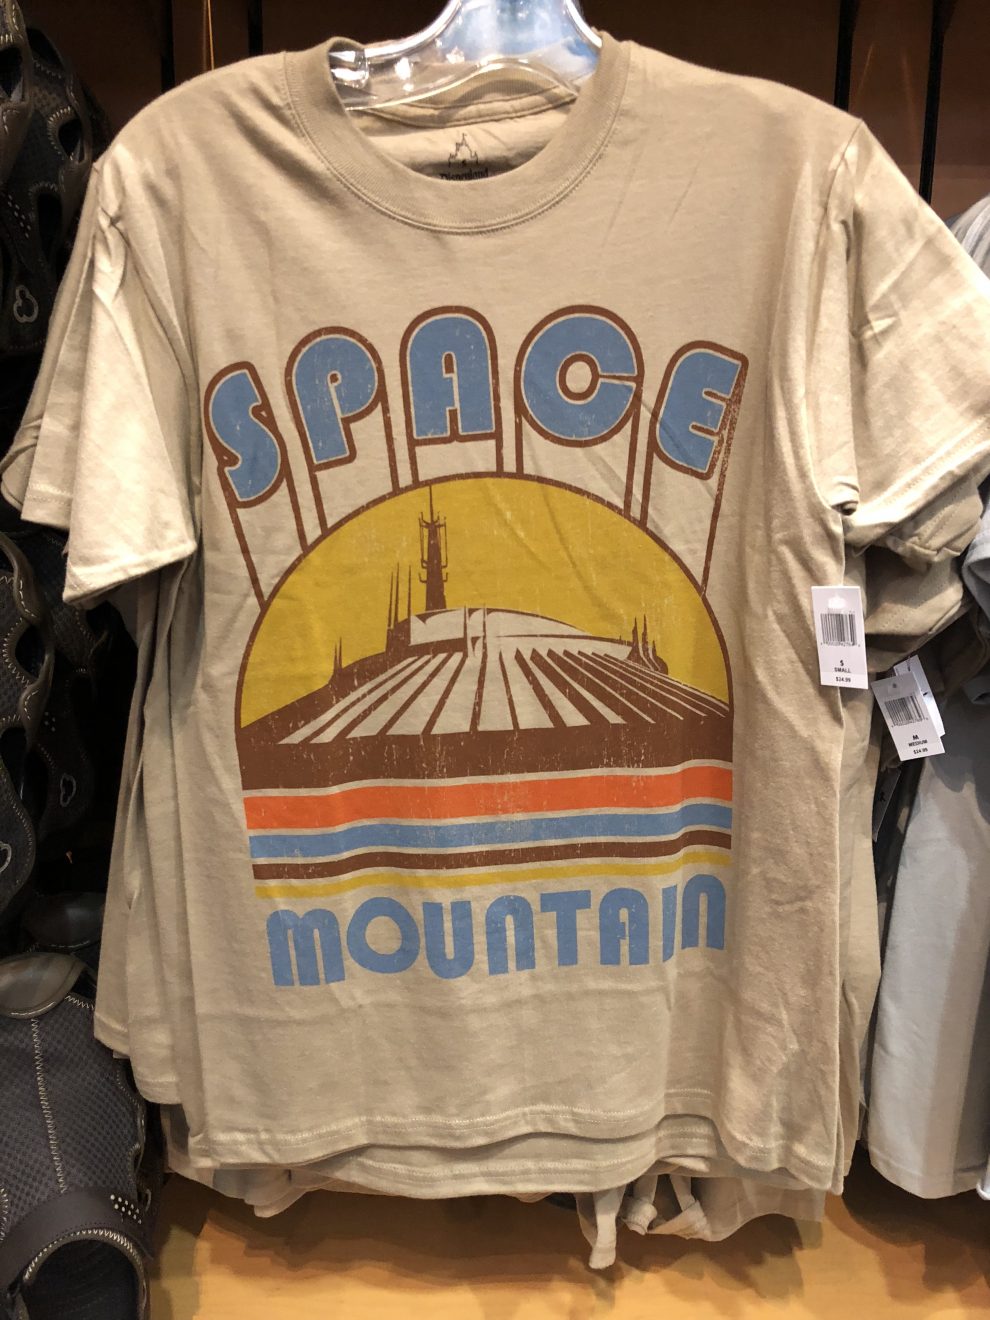 Park Attraction Tees with Vintage Style! - Fashion